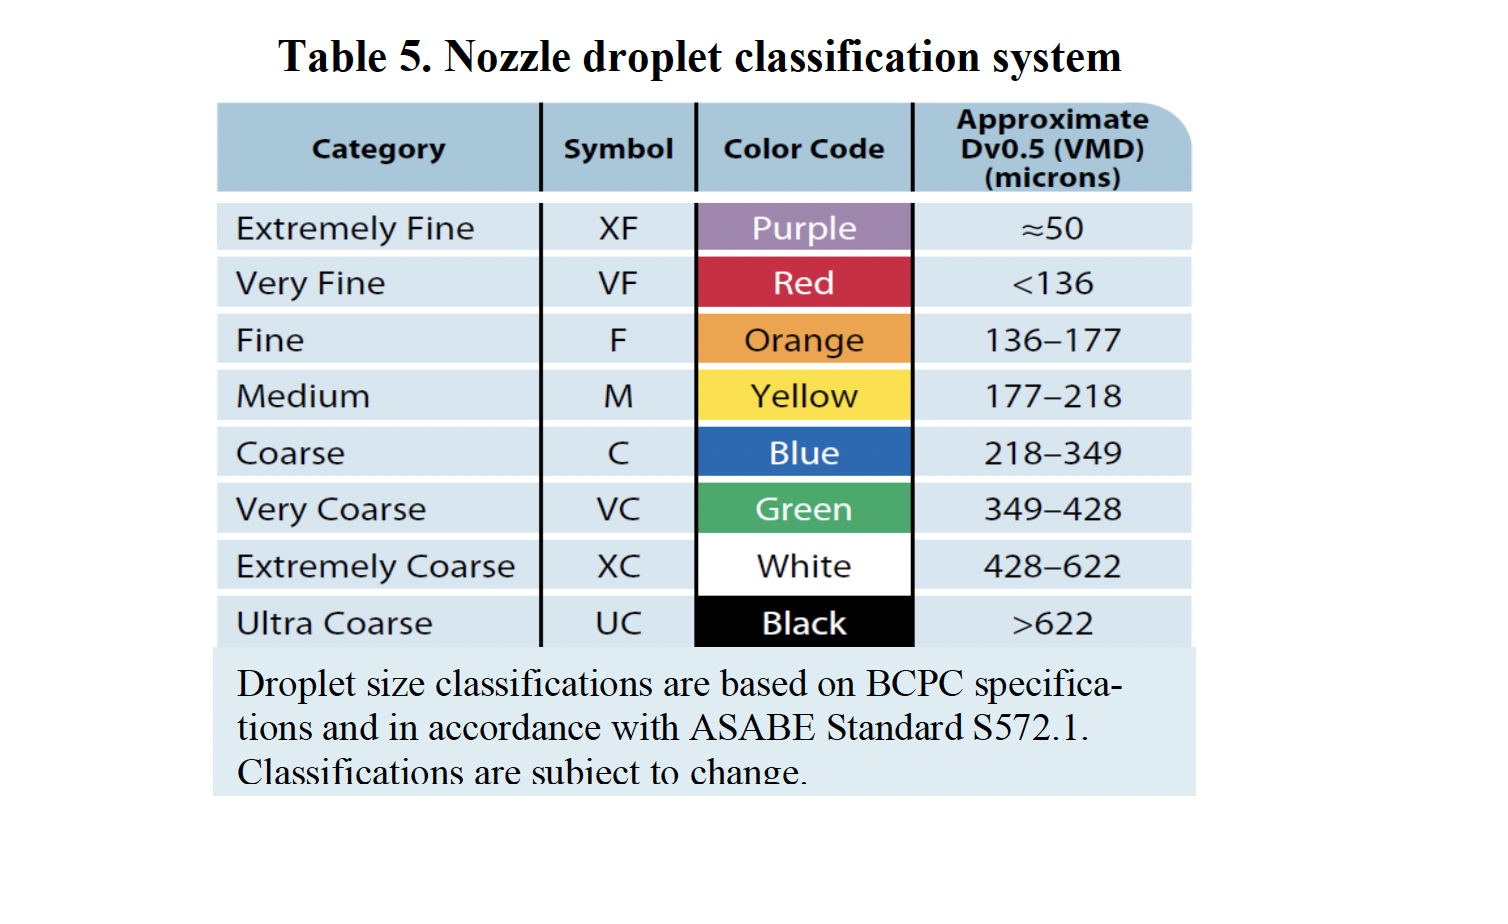 Table 5 of  Nozzle droplet classification system